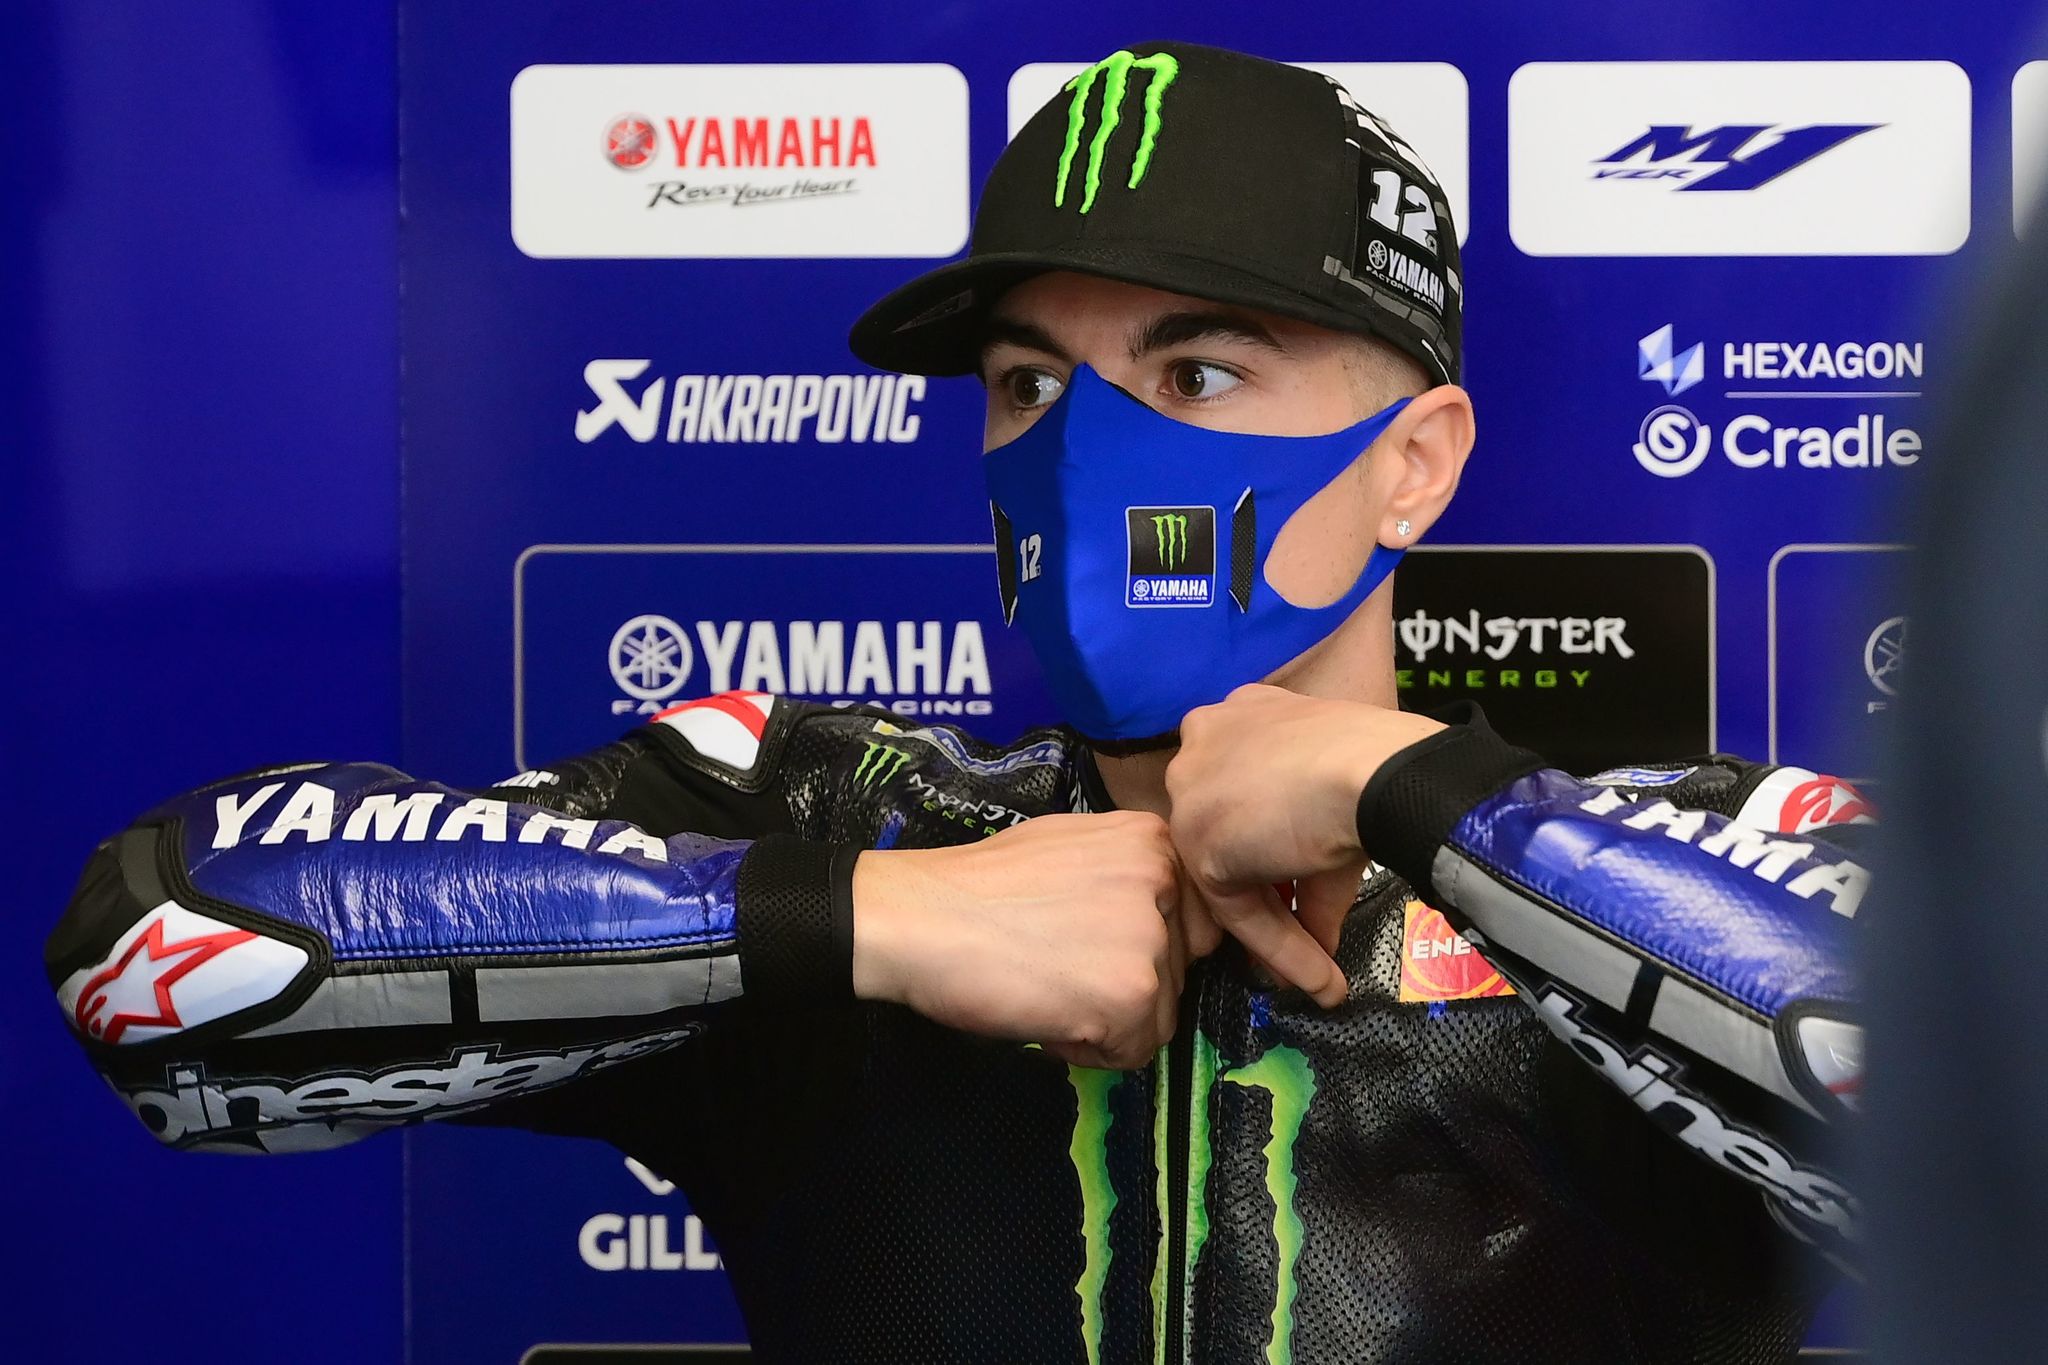 Monster Energy Yamaha's Spanish rider Maverick lt;HIT gt;Vinales lt;/HIT gt; gestures during the second MotoGP free practice session of the Moto Grand Prix de Catalunya at the Circuit de Catalunya on September 25, 2020 in Montmelo on the outskirts of Barcelona. (Photo by LLUIS GENE / AFP)